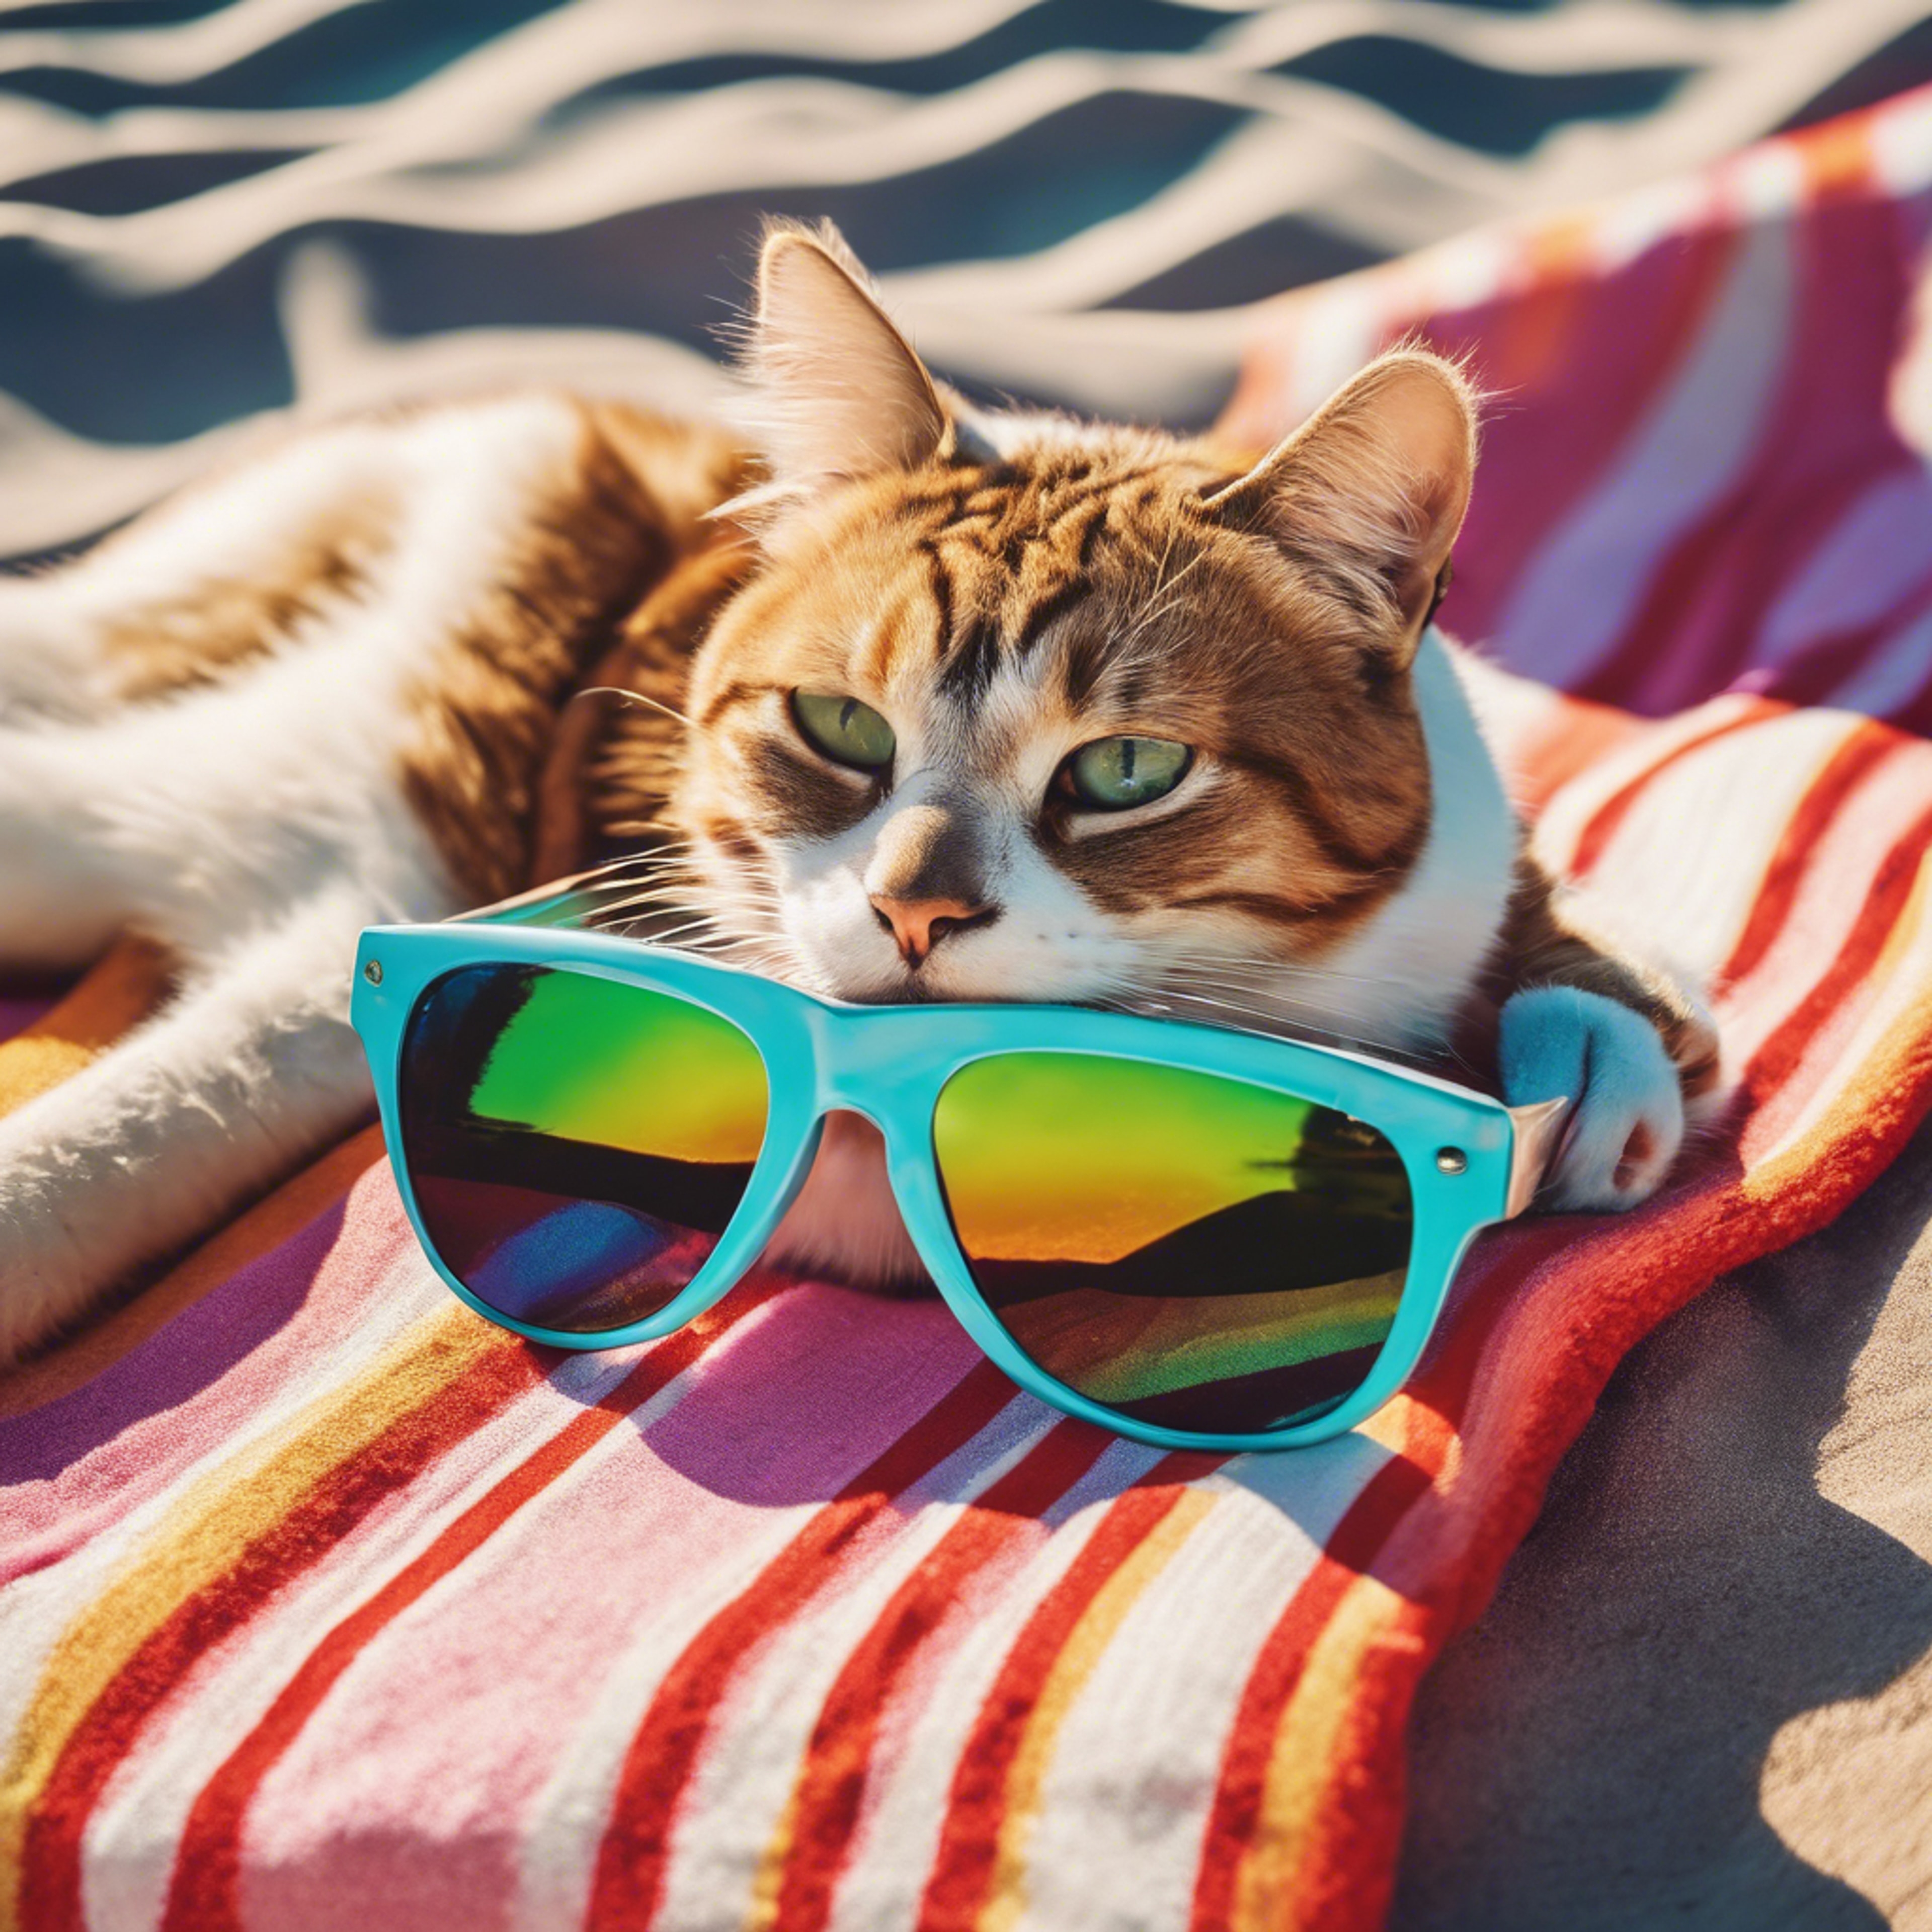 A retro pop art style image of a cool, sunglasses-wearing cat lounging on a colorful beach towel beside a vibrant 1960's surfboard.壁紙[e50f27795d574de68276]